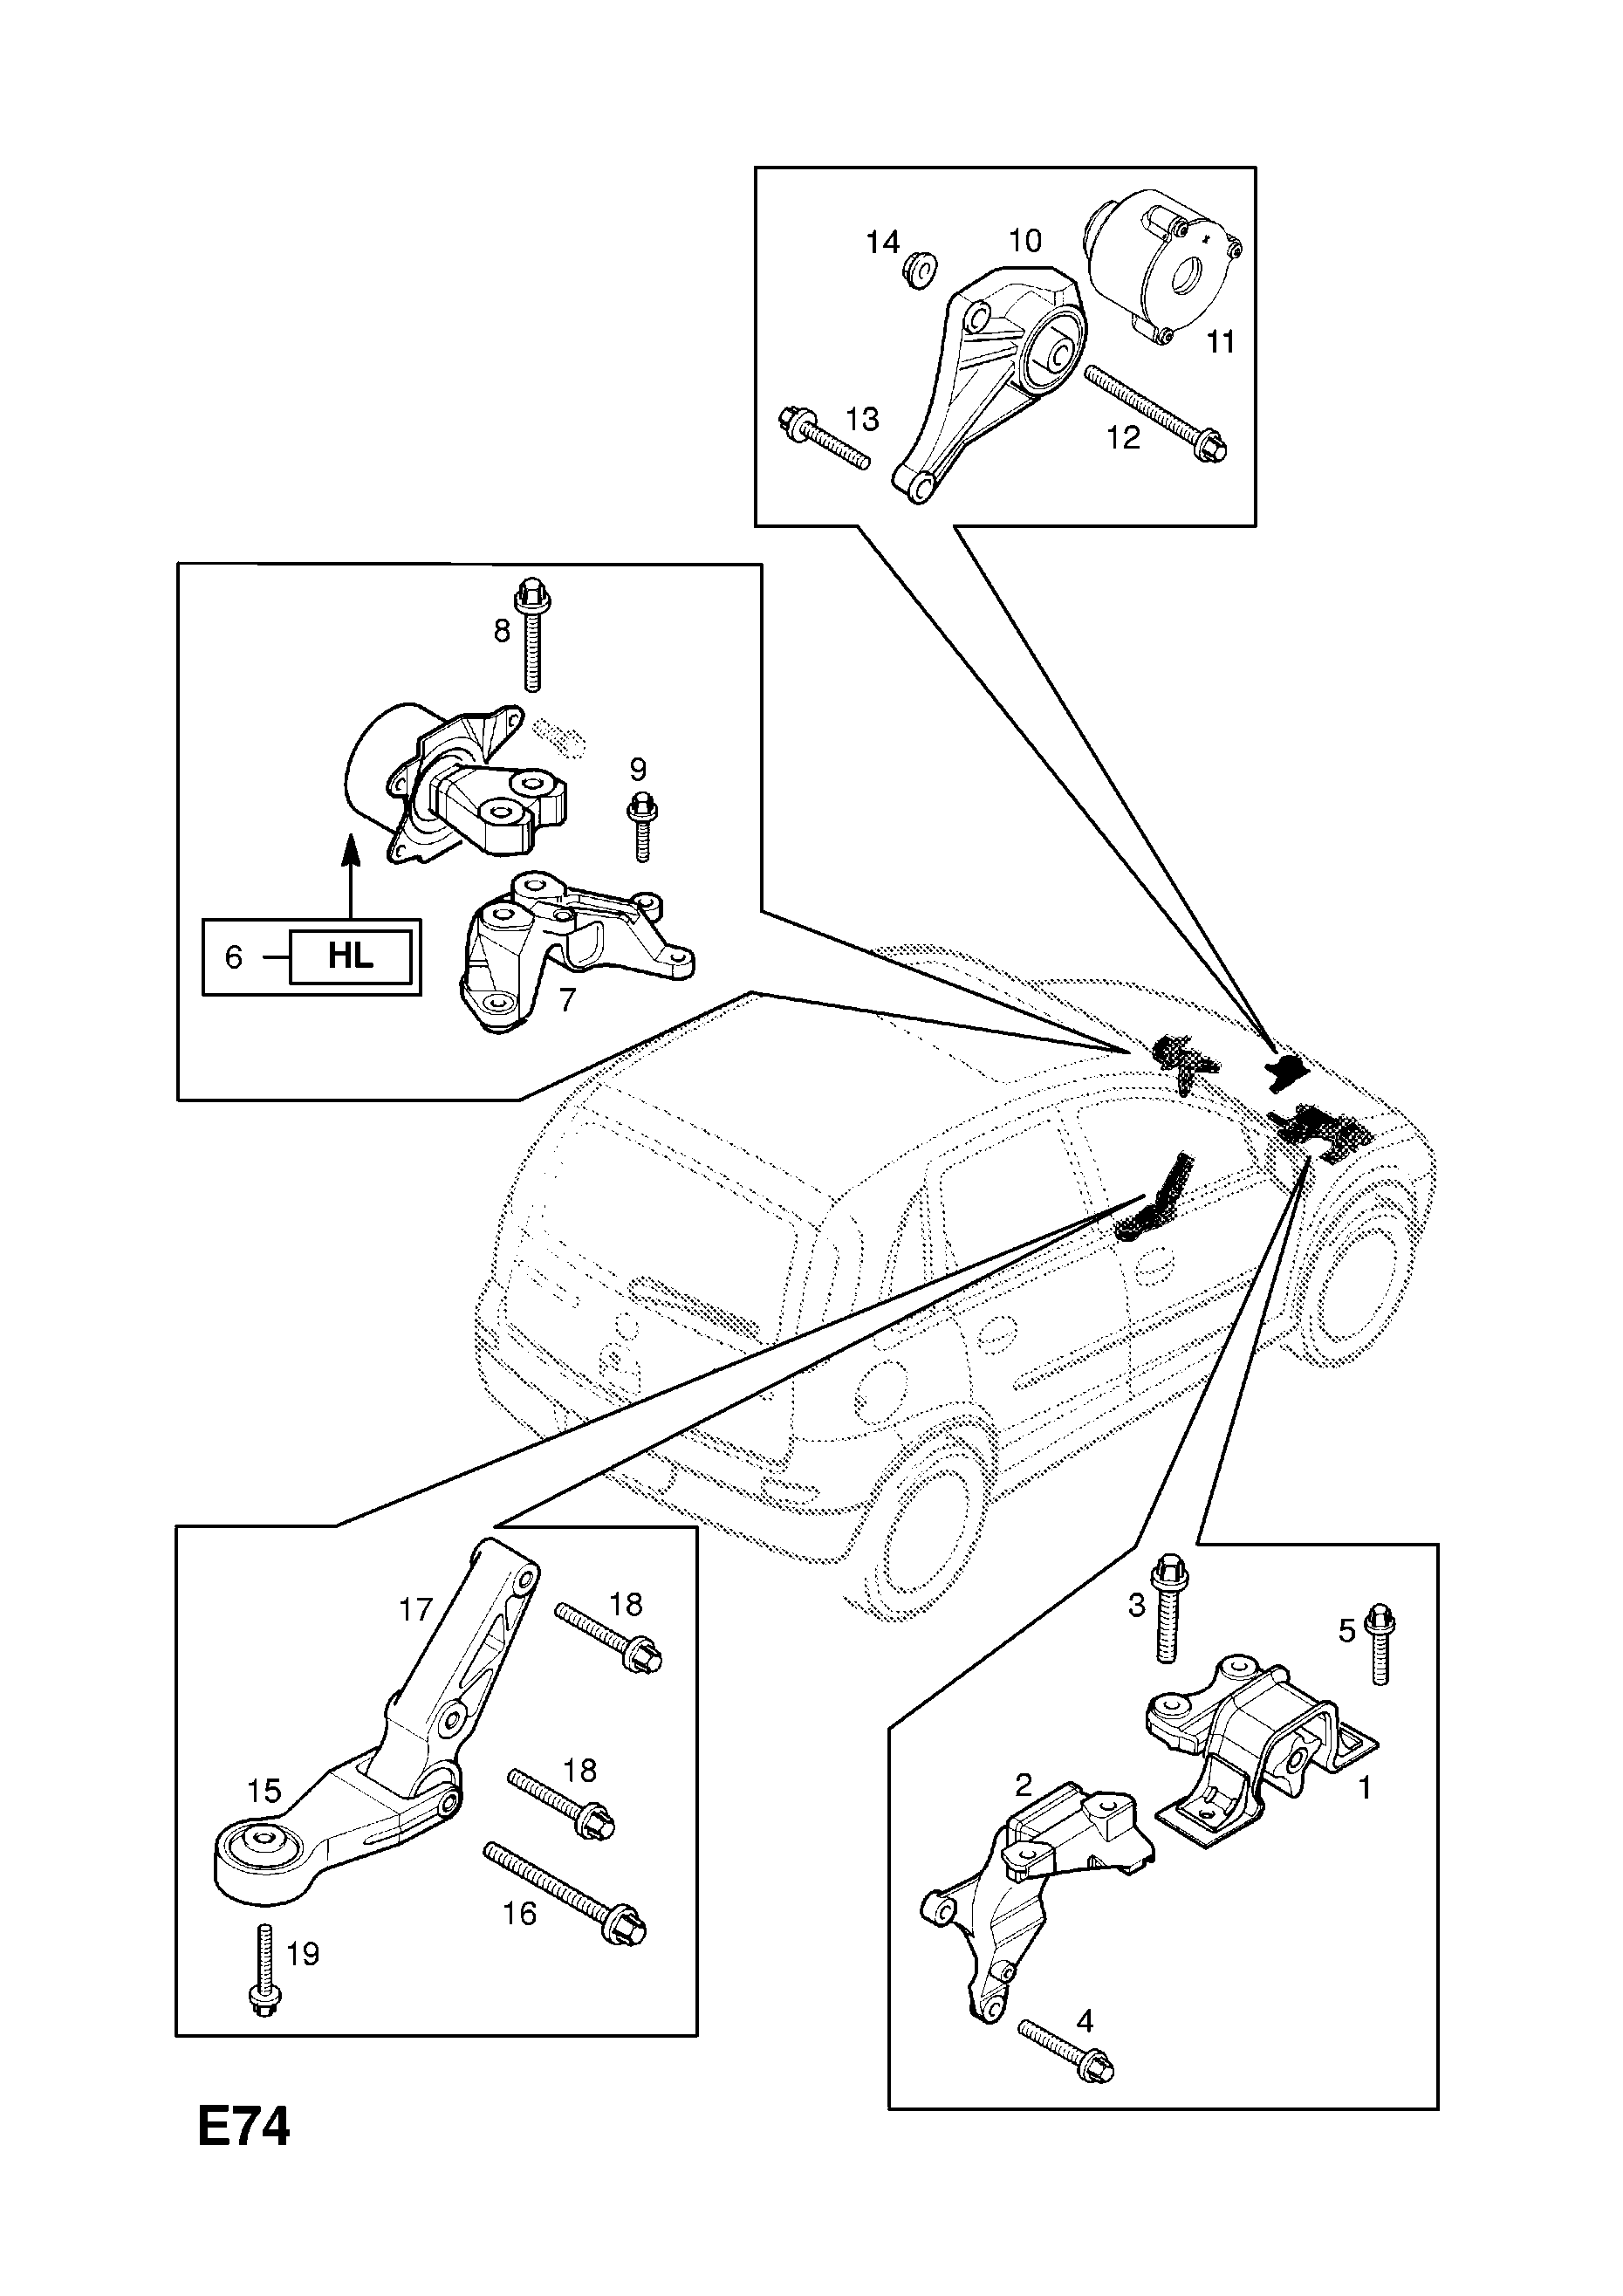 ENGINE MOUNTINGS <small><i>[LEFT ENGINE MOUNTING]</i></small>